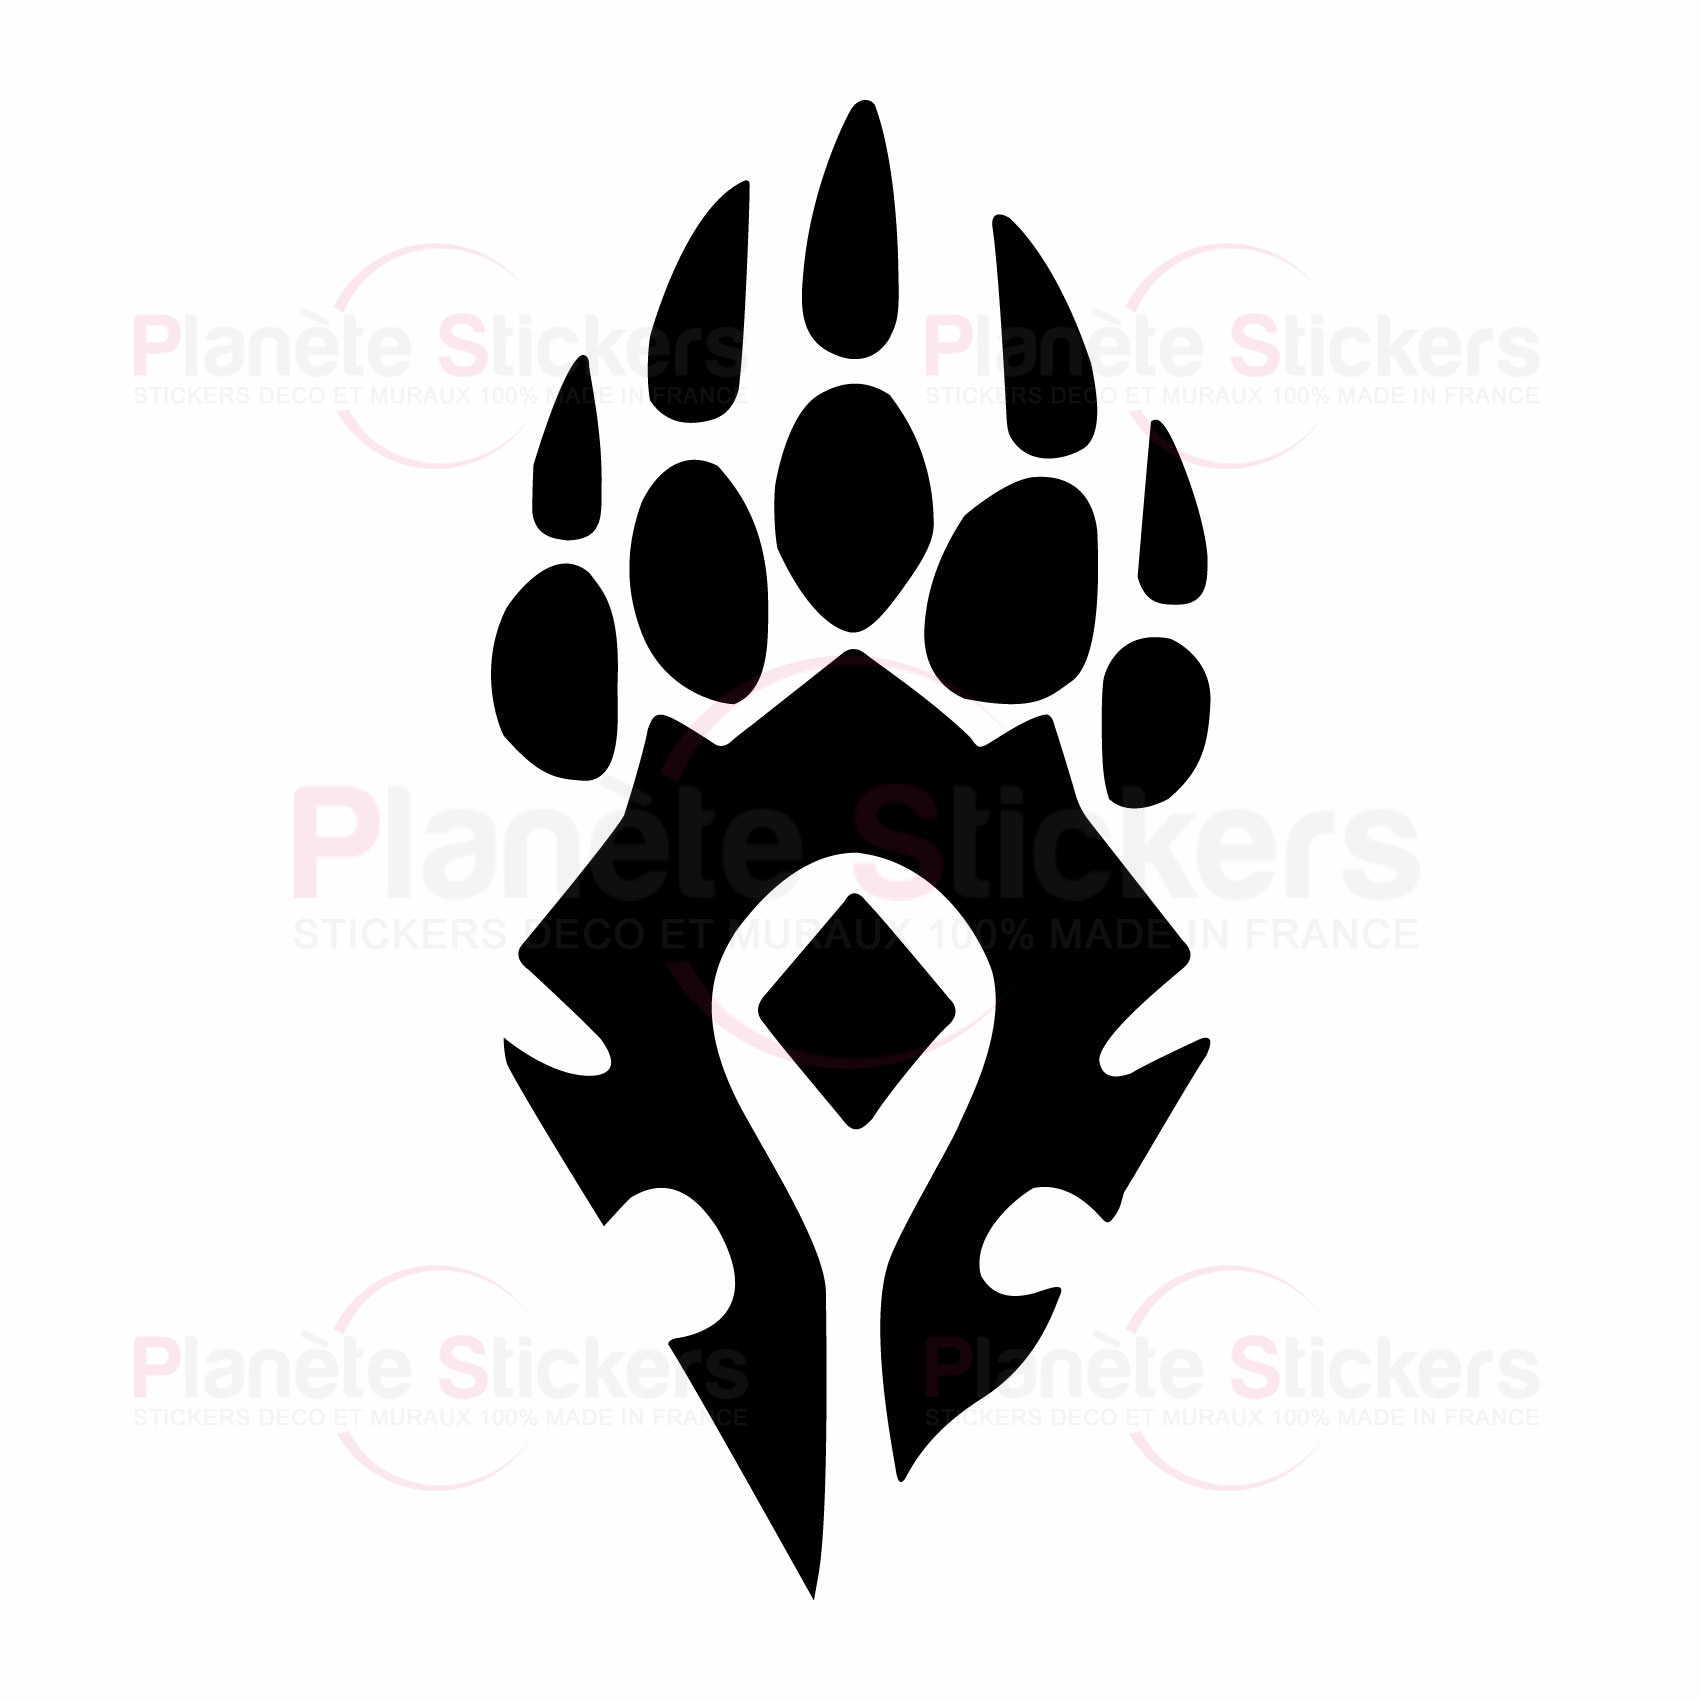 stickers-horde-druide-wow-ref9wow-stickers-muraux-world-of-warcraft-autocollant-mural-jeux-video-sticker-gamer-deco-gaming-salon-chambre-(2)